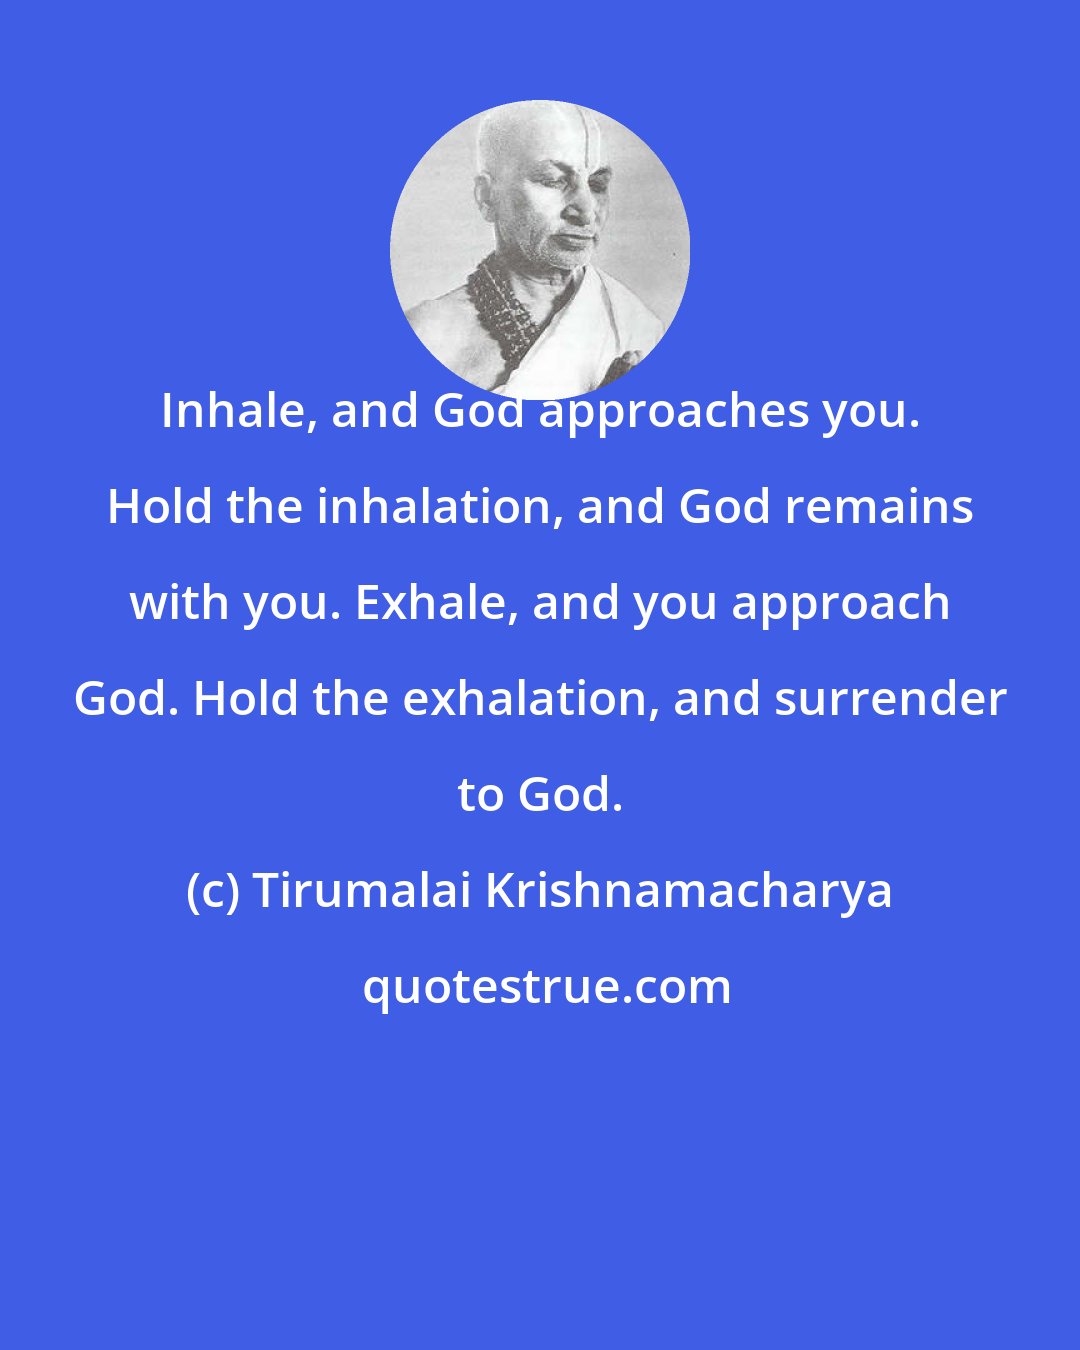 Tirumalai Krishnamacharya: Inhale, and God approaches you. Hold the inhalation, and God remains with you. Exhale, and you approach God. Hold the exhalation, and surrender to God.